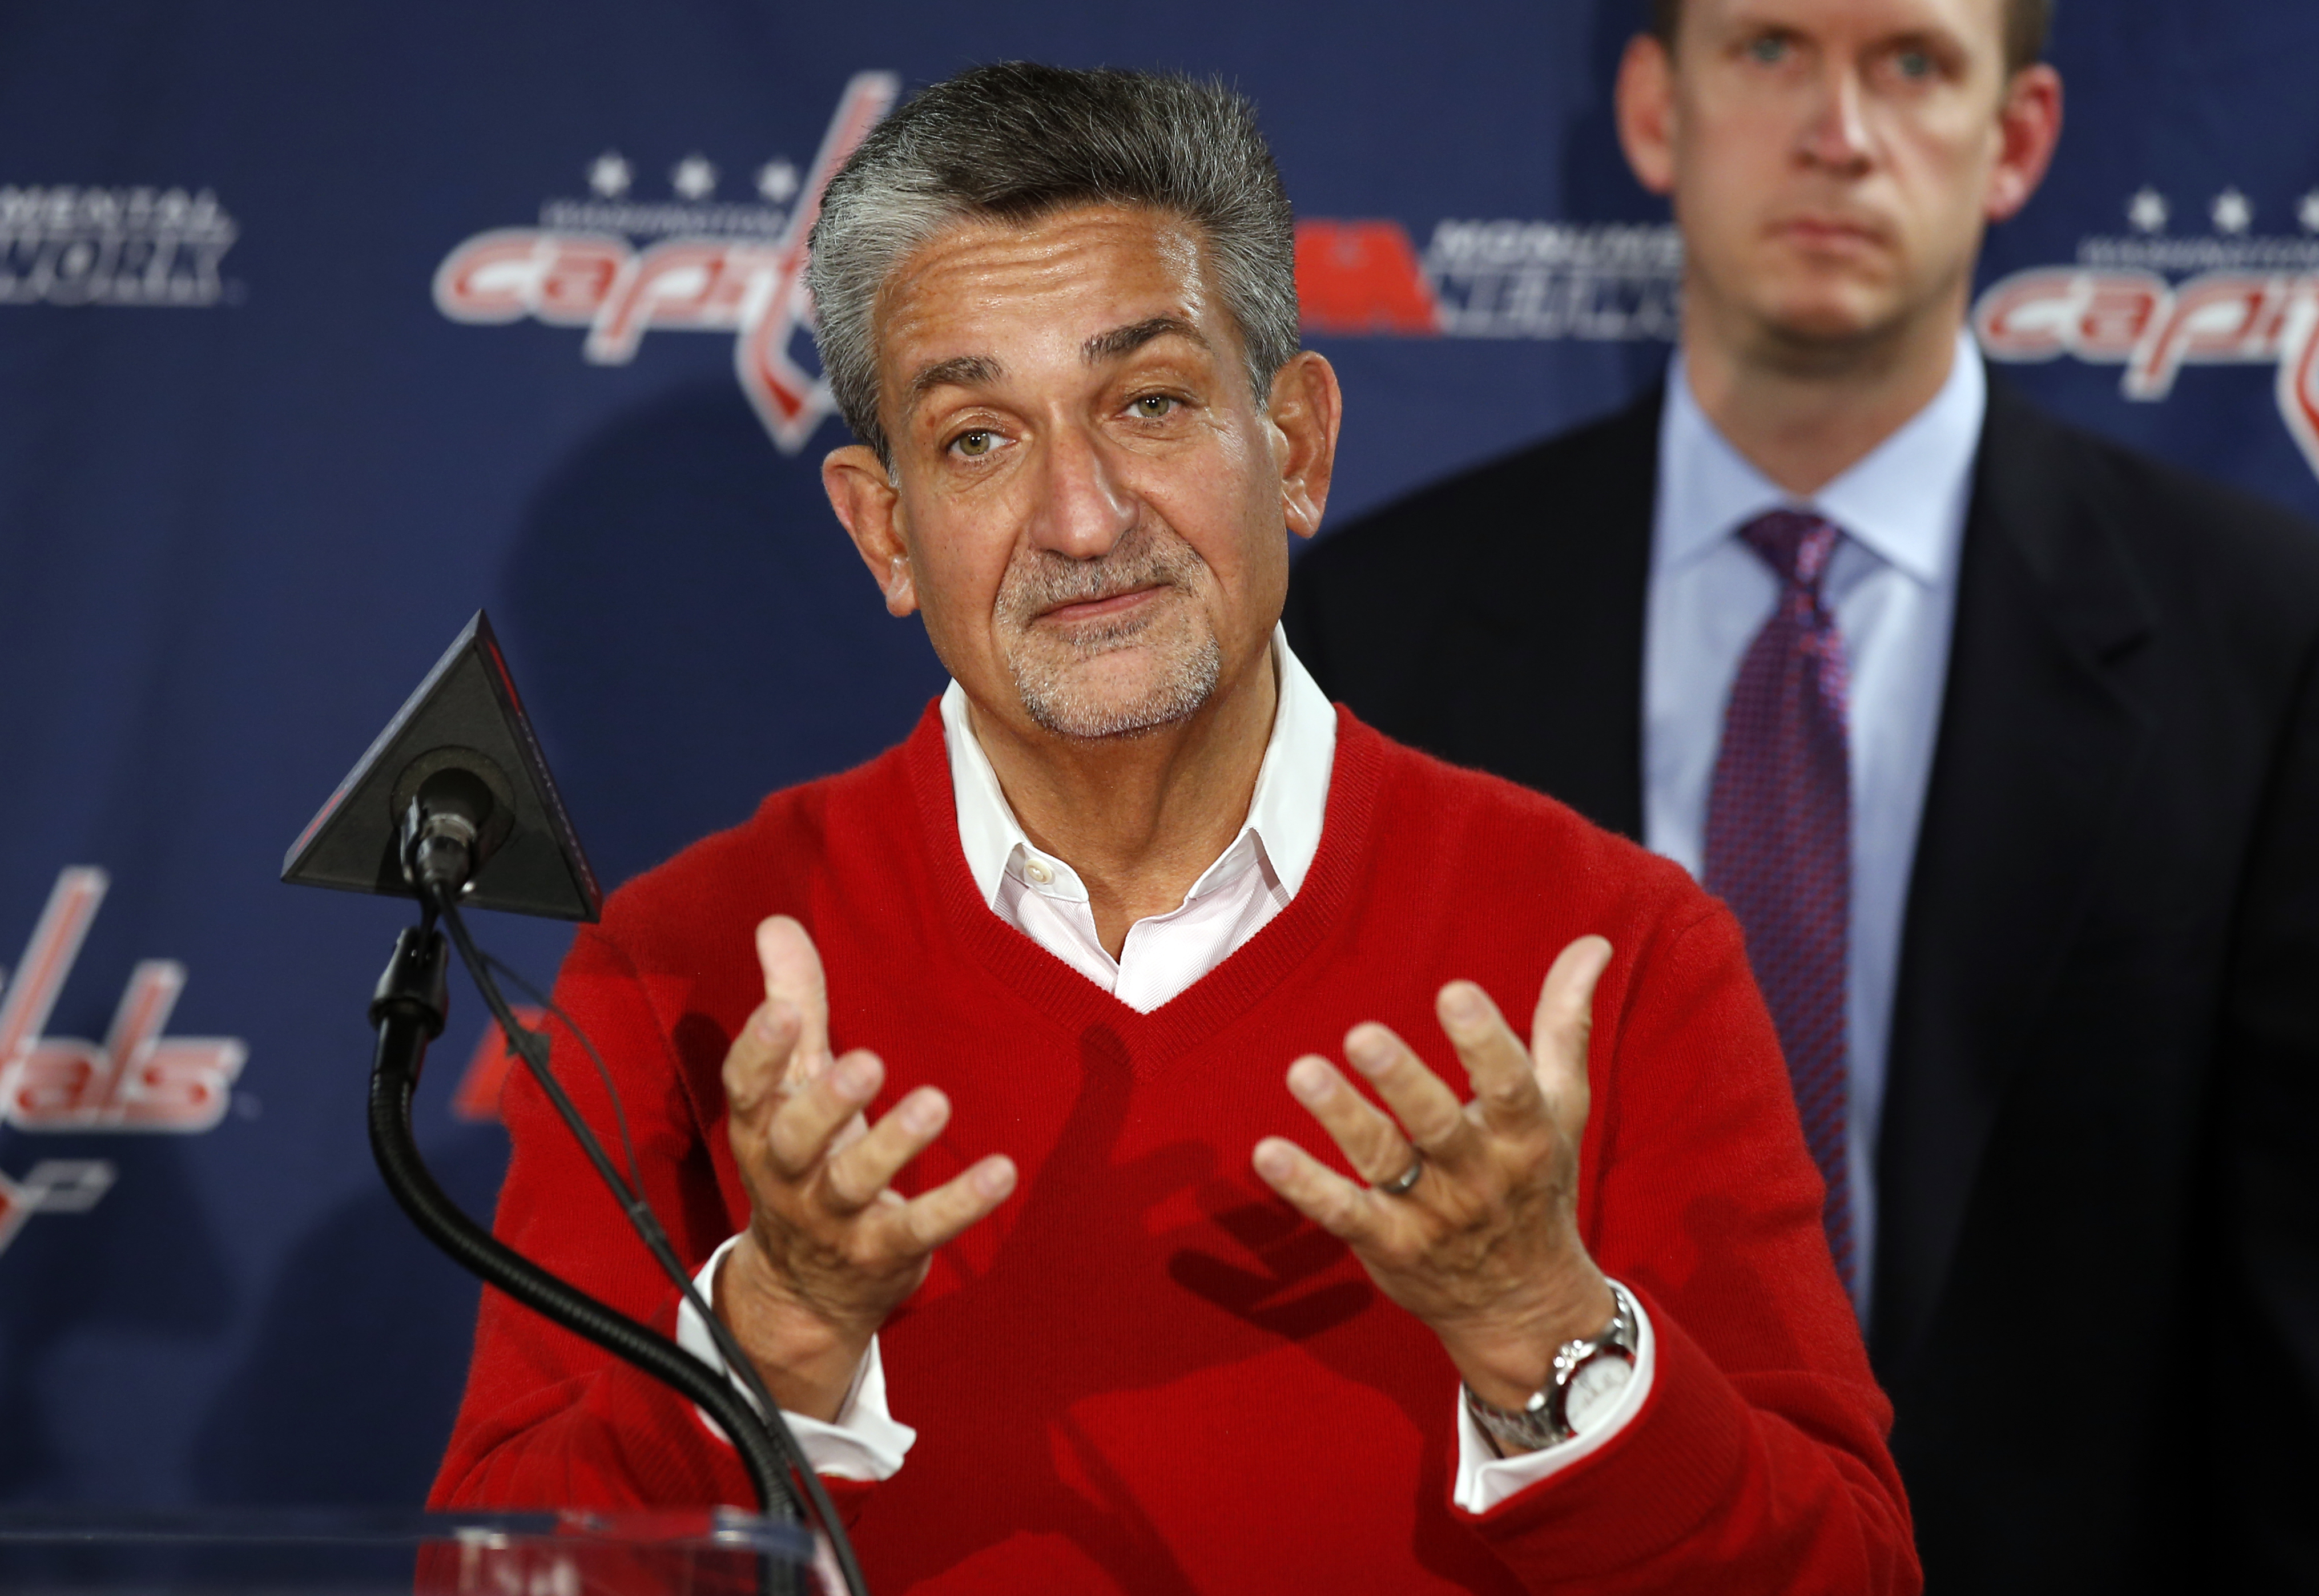 MedStar Health gets naming rights for Capitals, Wizards facilities